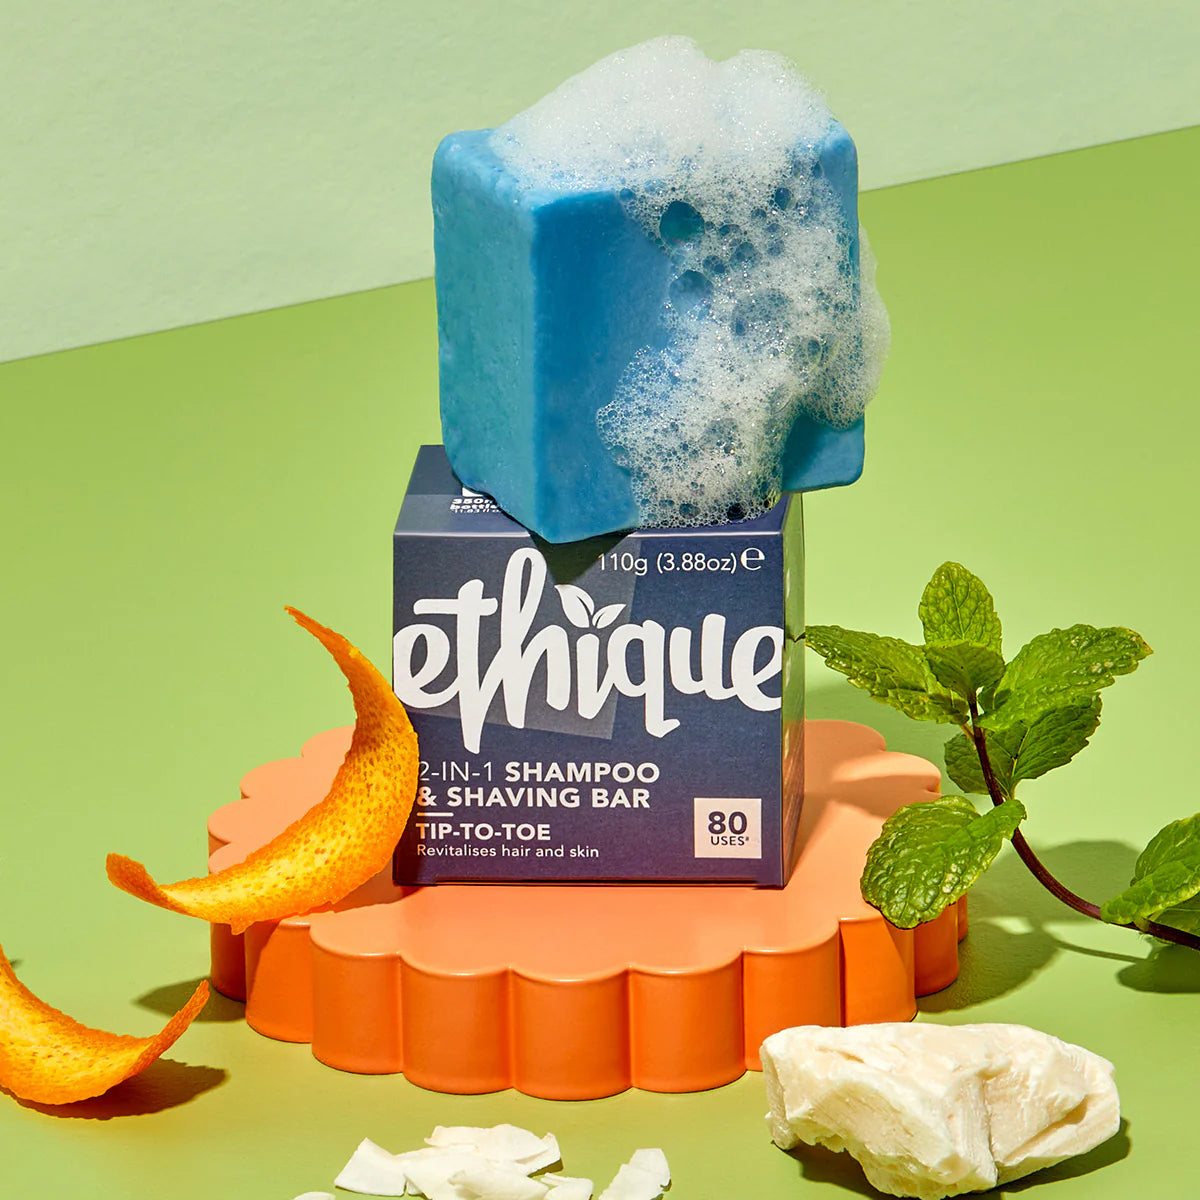 Ethique Tip-to-Toe 2-In-1 Solid Shampoo & Shaving Bar-The Living Co.